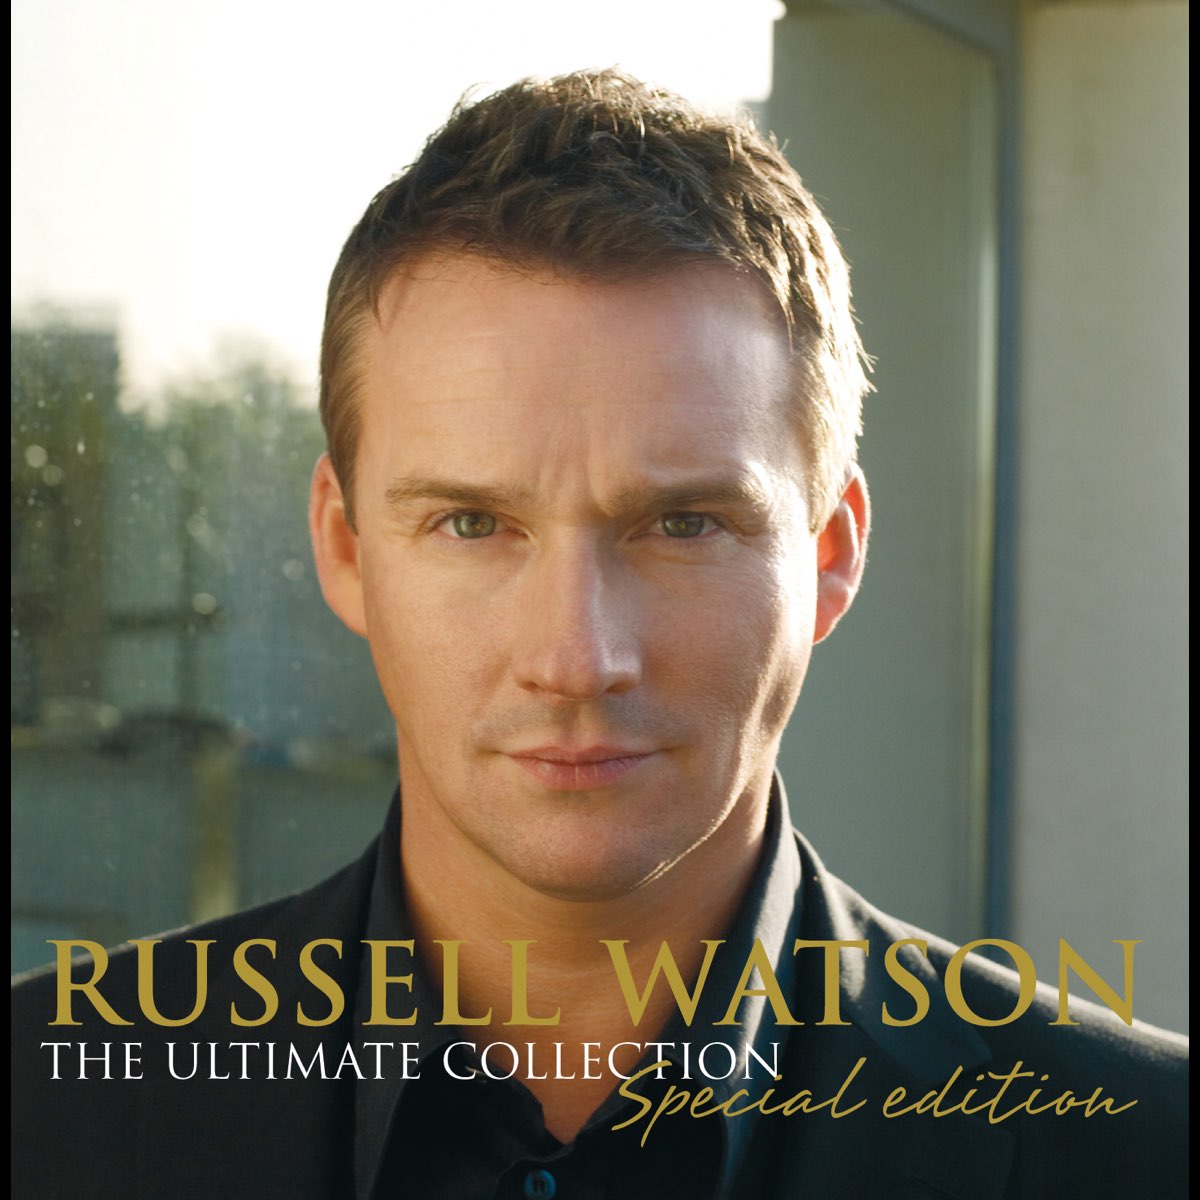 Russell Watson: The Ultimate Collection by Russell Watson on Apple